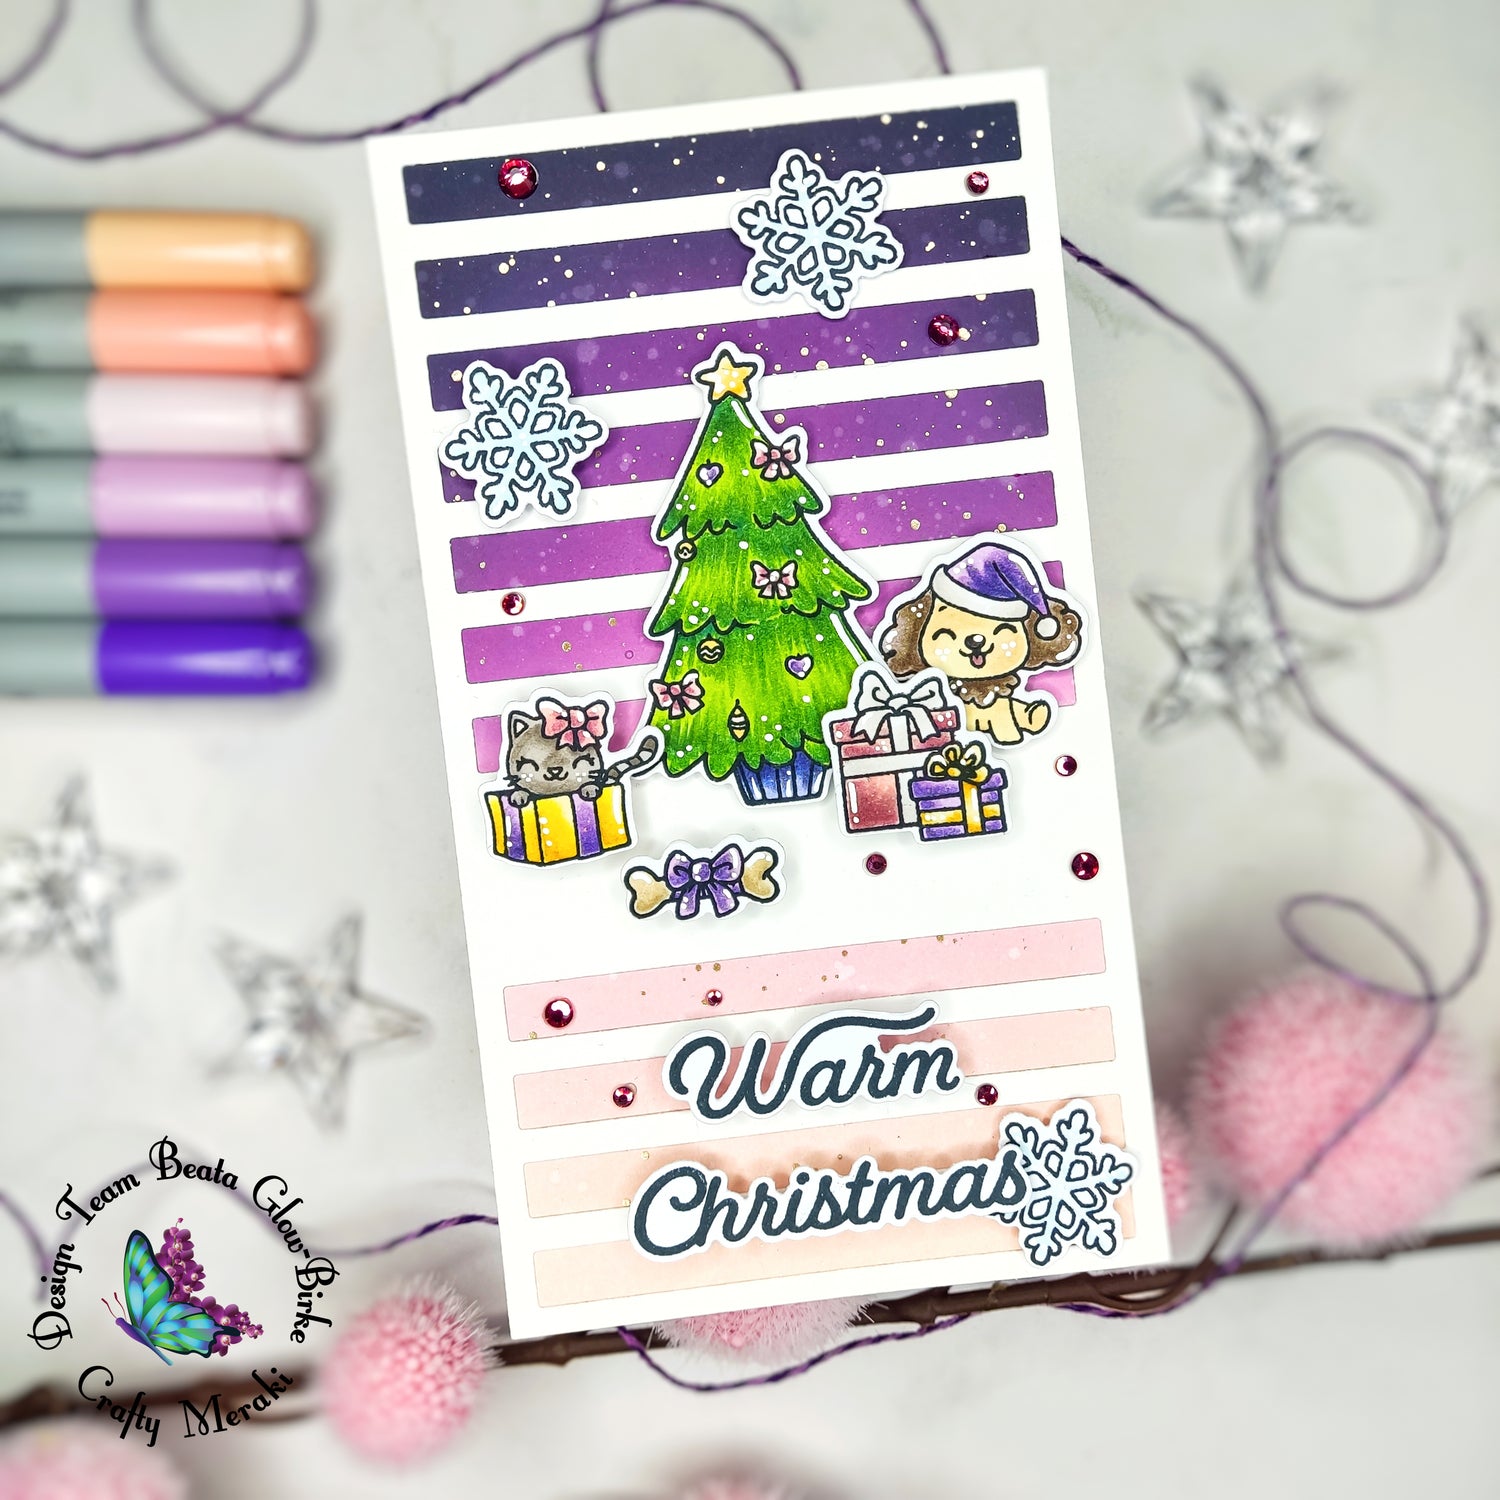 Christmas in pastel colors